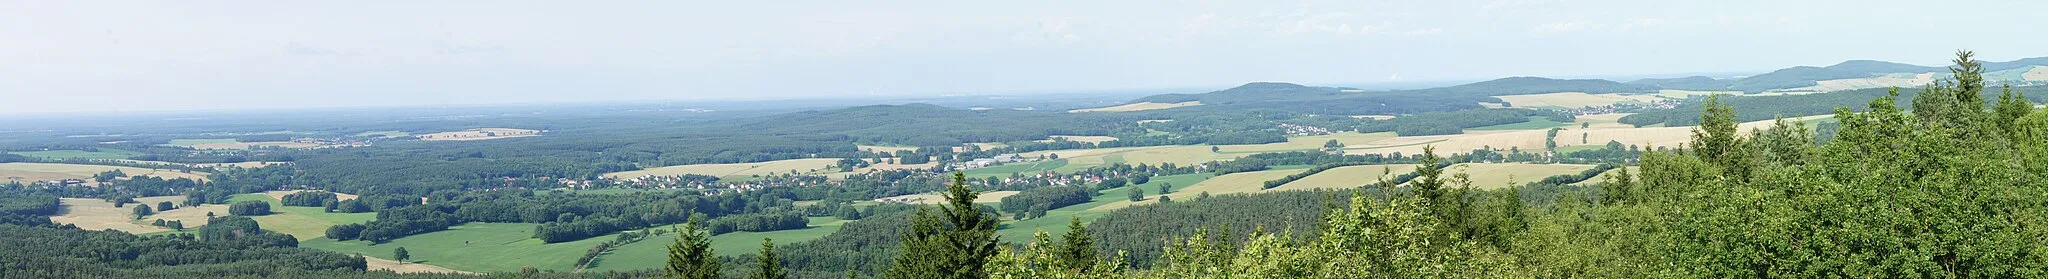 Photo showing: Keulenberg,  413 m hohe Erhebung in der Westlausitz und Wandergebiet.

Camera location 51° 13′ 42.96″ N, 13° 57′ 28.08″ E View this and other nearby images on: OpenStreetMap 51.228600;   13.957800
Panoramablick vom Keulenberg